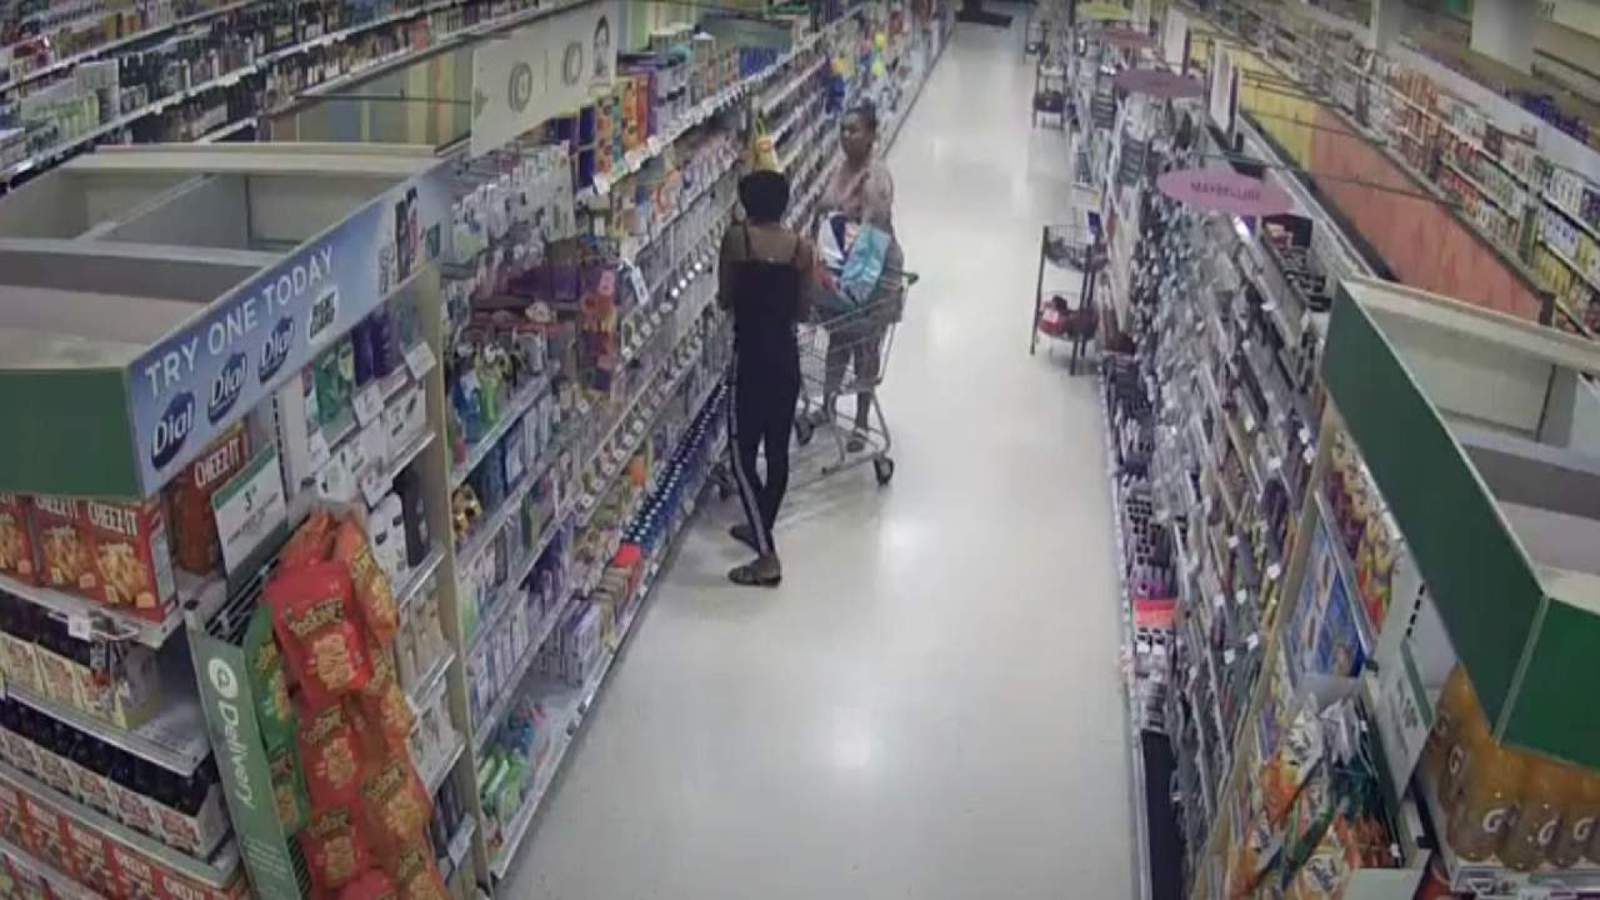 Racketeering ring steals baby items worth nearly 85K from Florida grocery stores, sheriff says